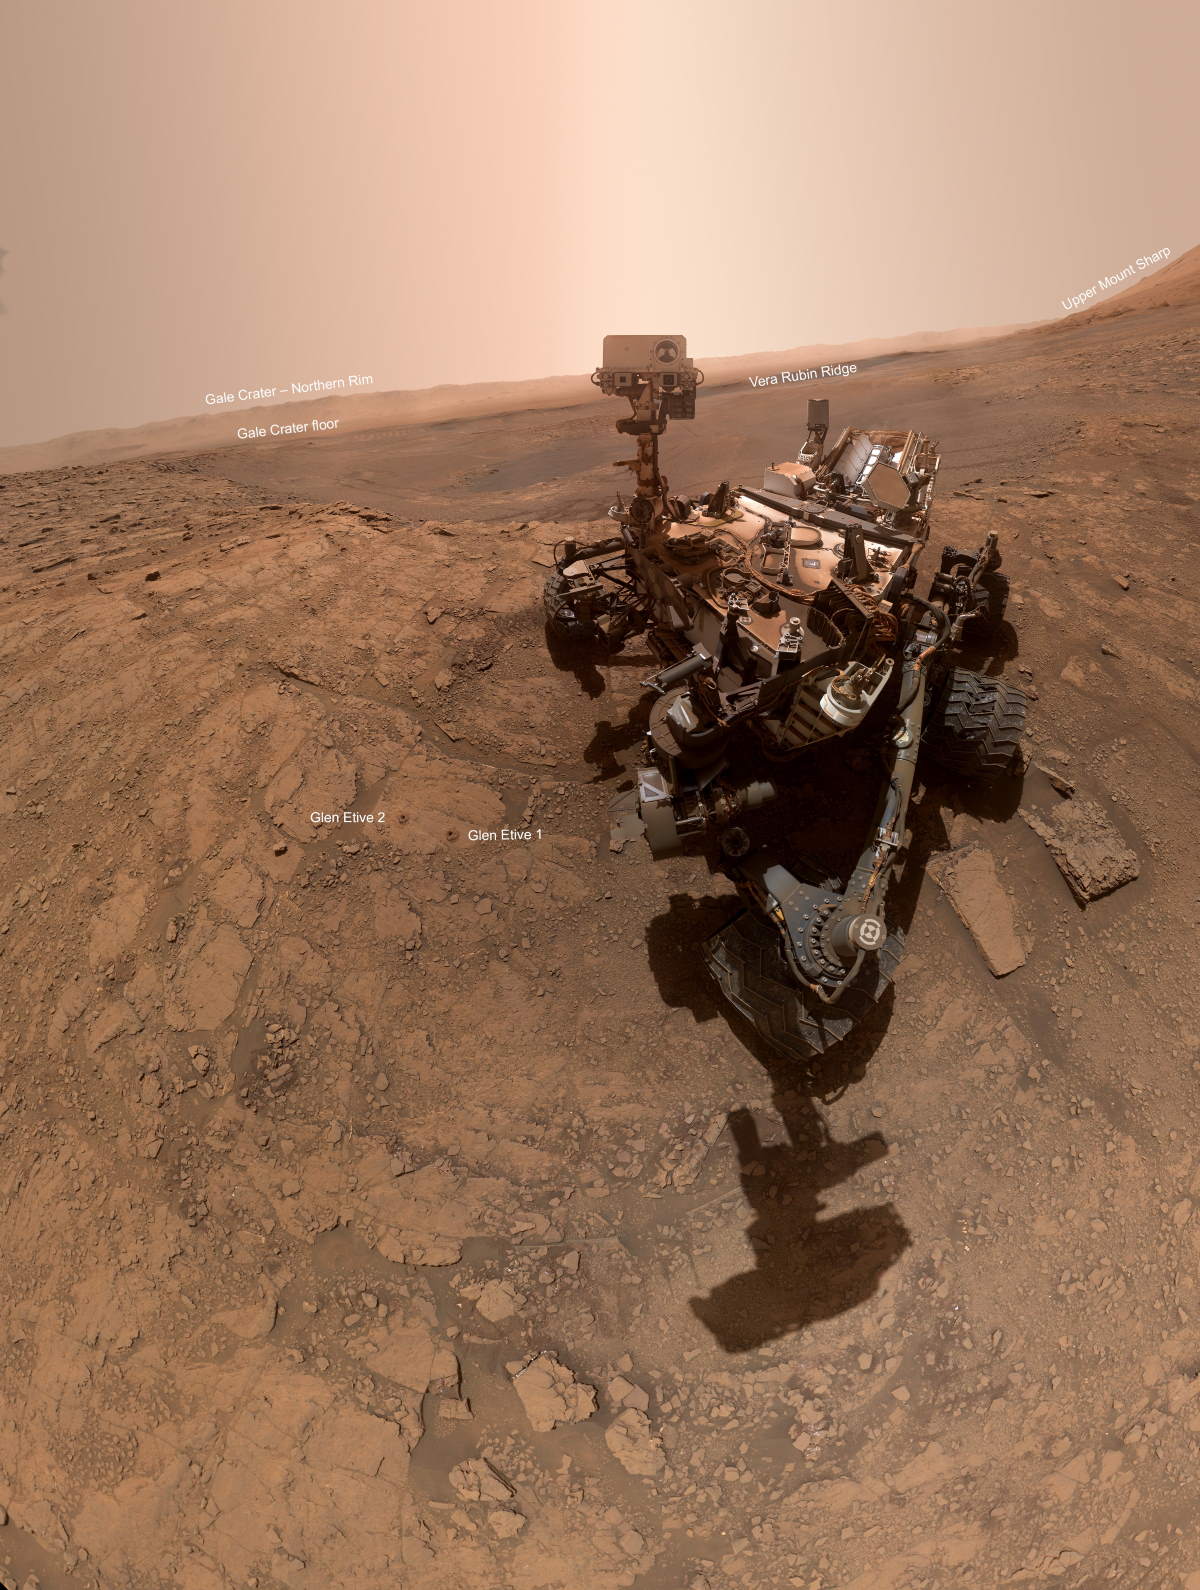 Curiosity Rover selfie (October 11, 2019) - annotated version